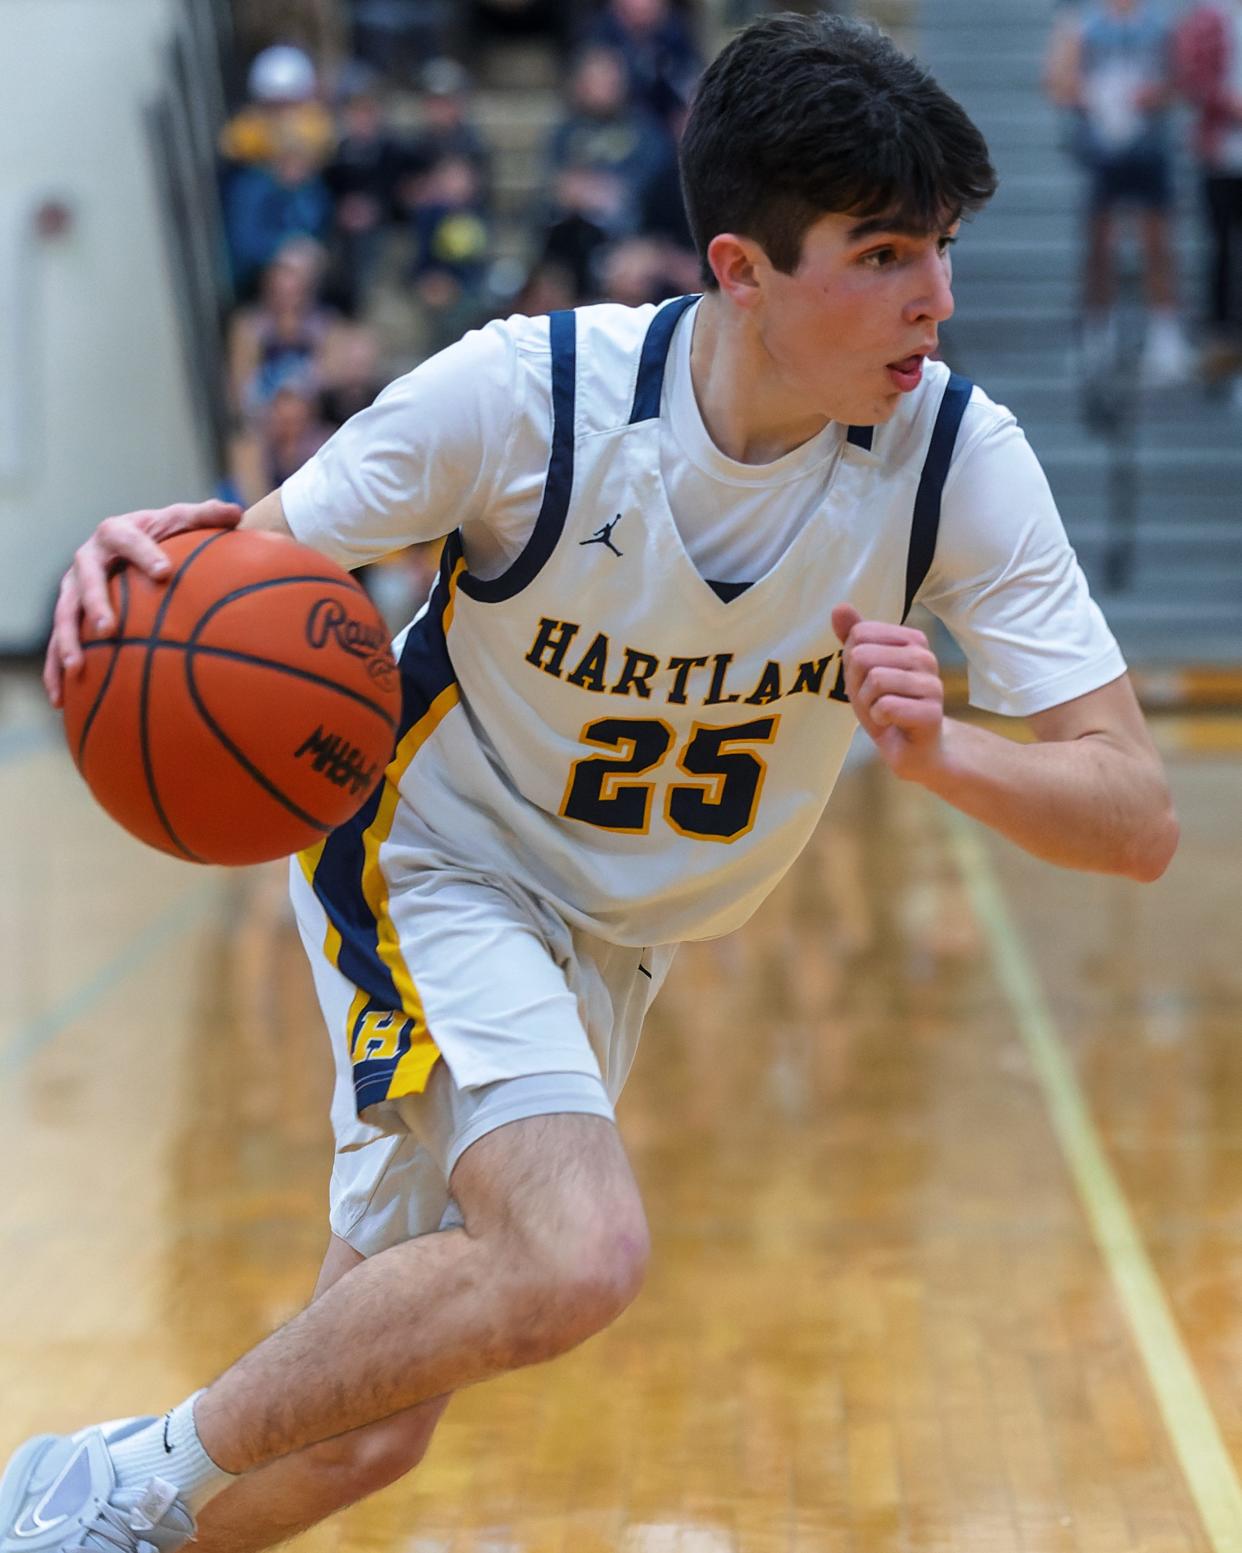 Brady Quinn will play point guard and provide strong defense for Hartland.